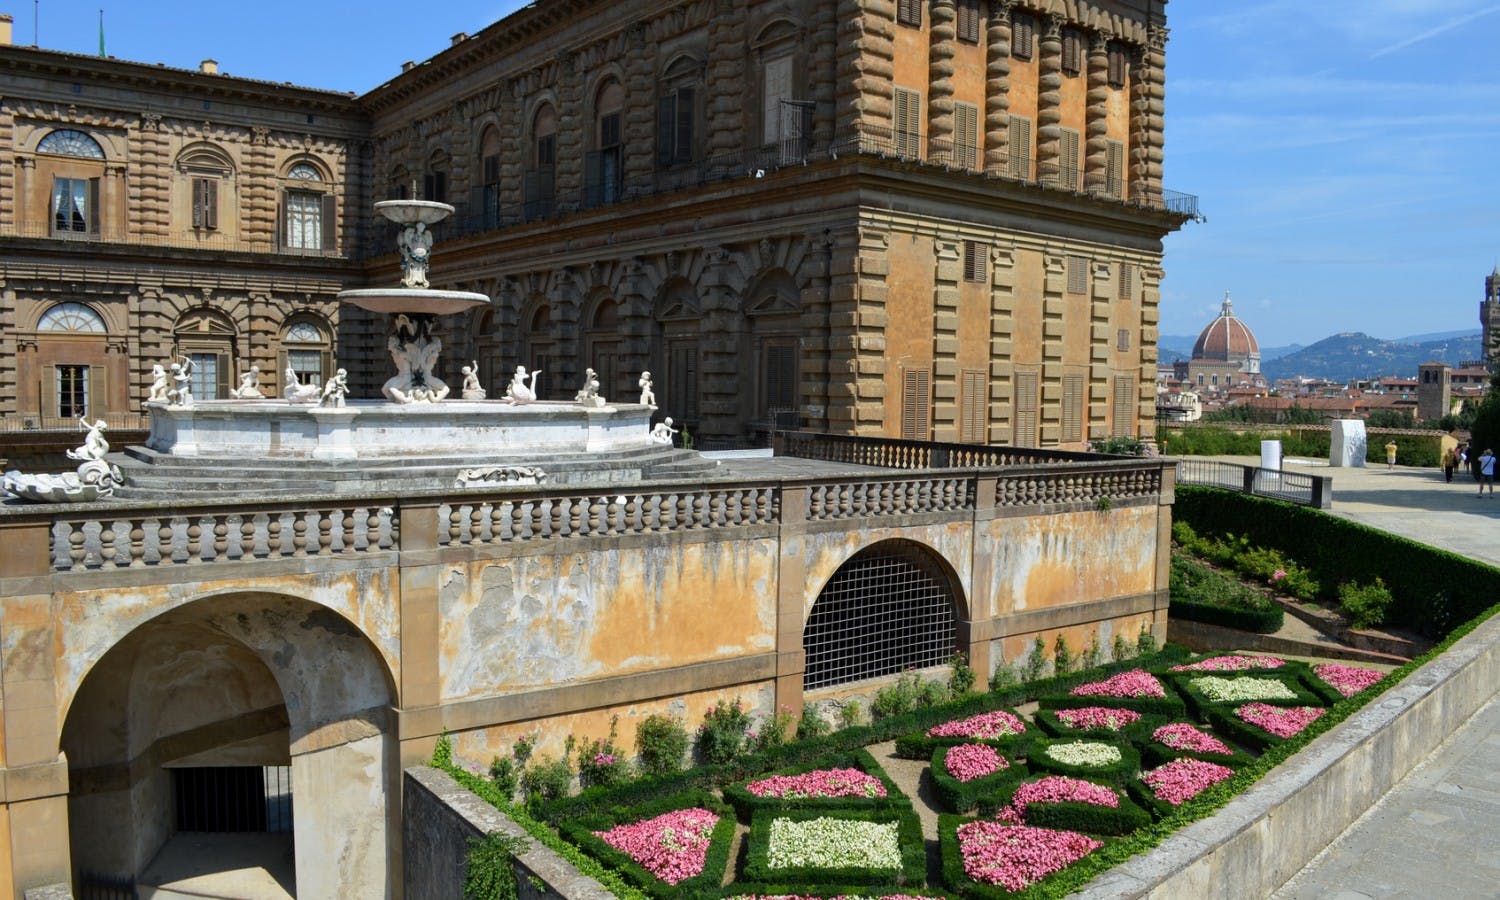 Pitti Palace tour: the magnificence of the Medici dynasty